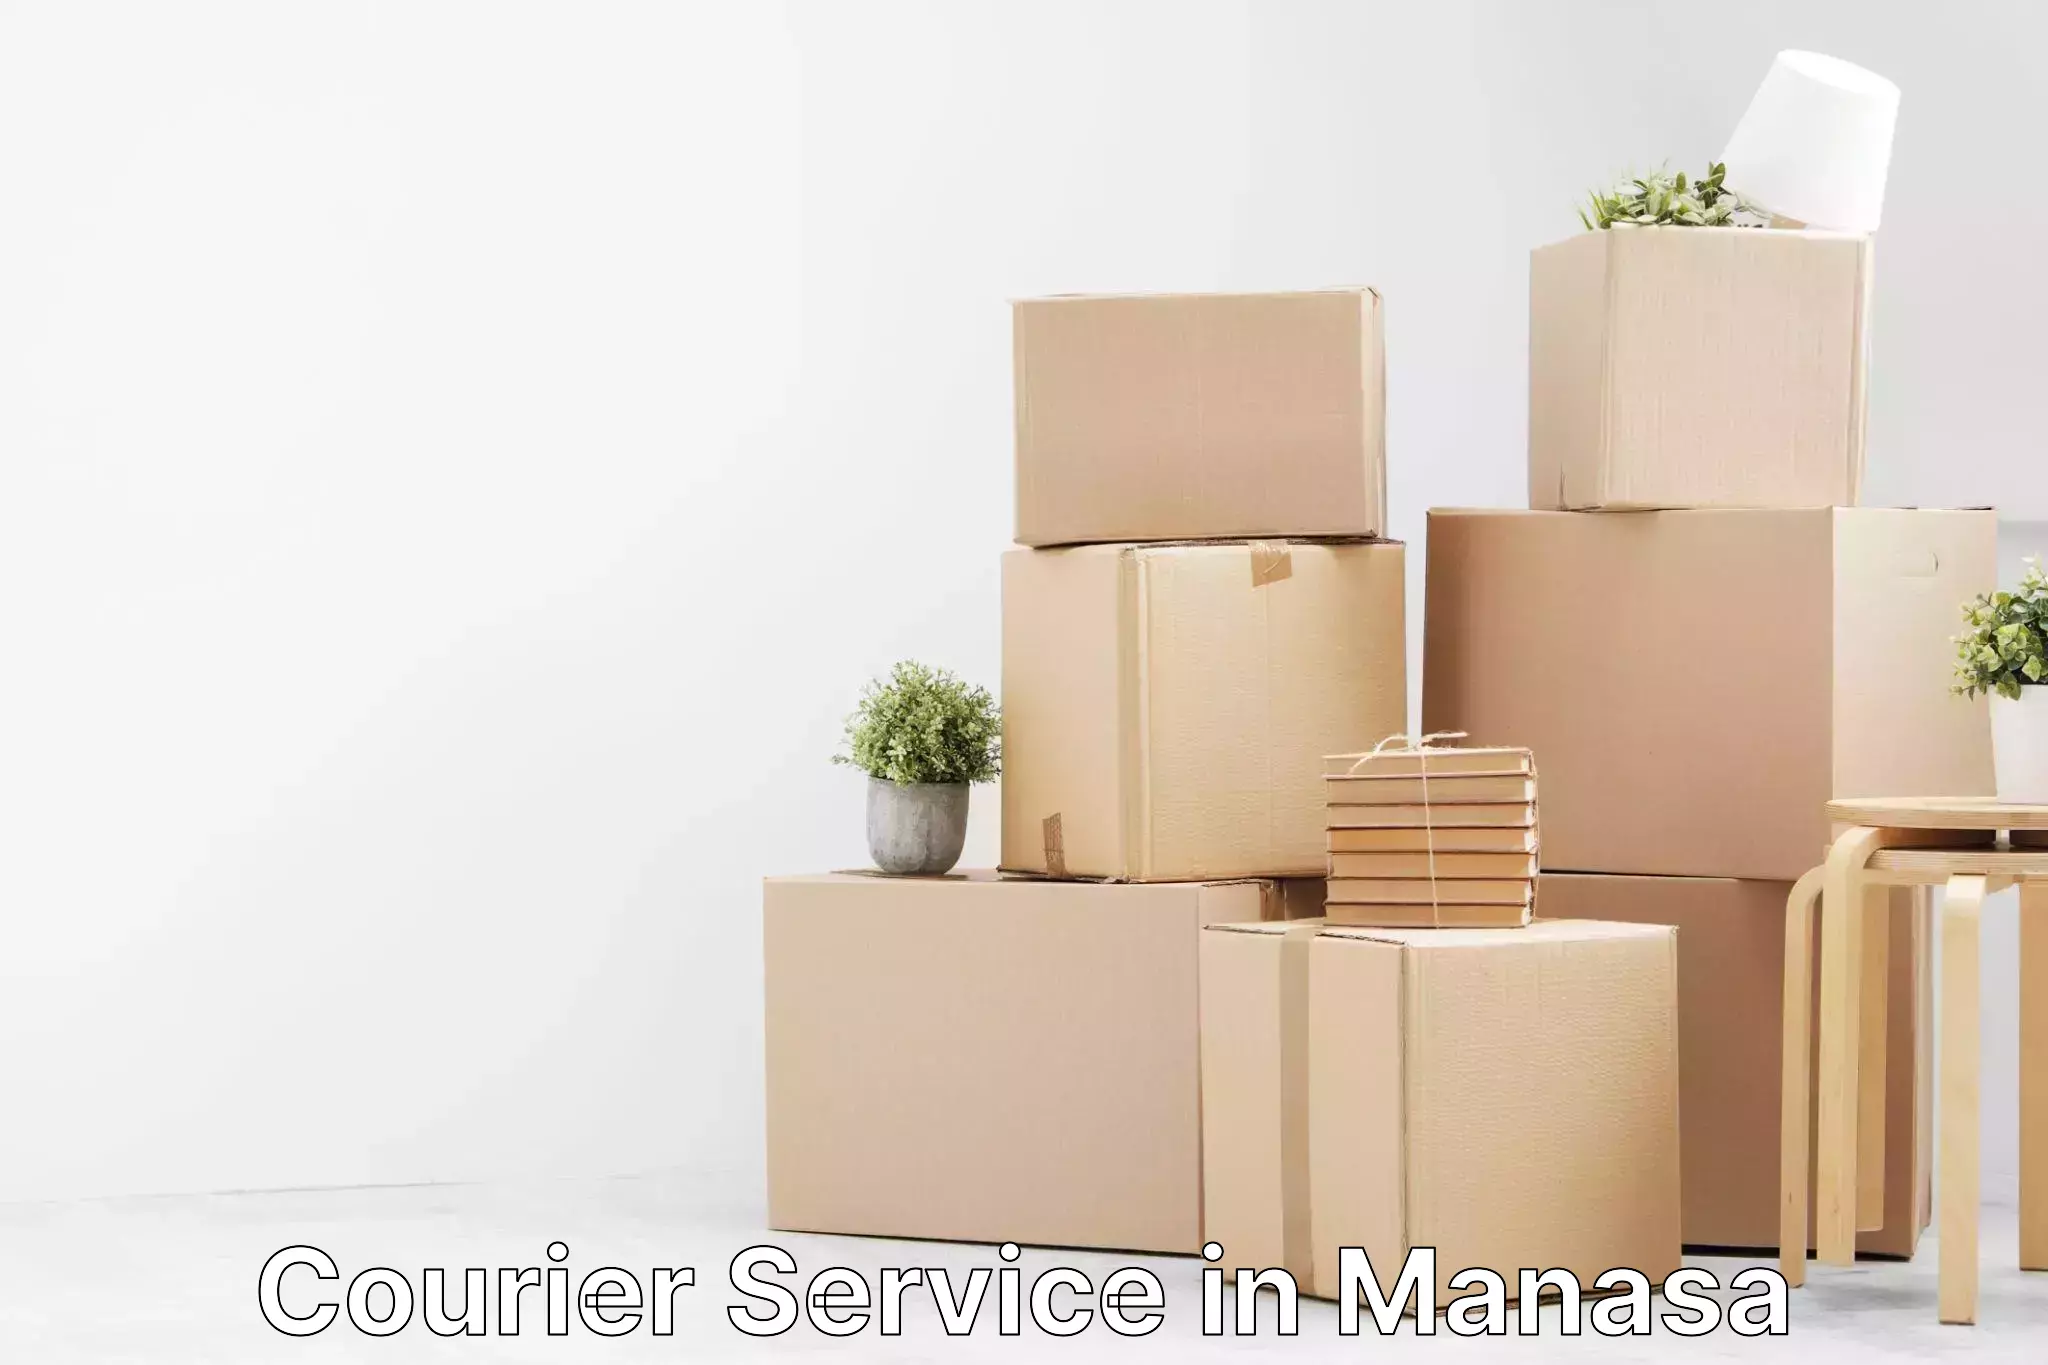 On-call courier service in Manasa